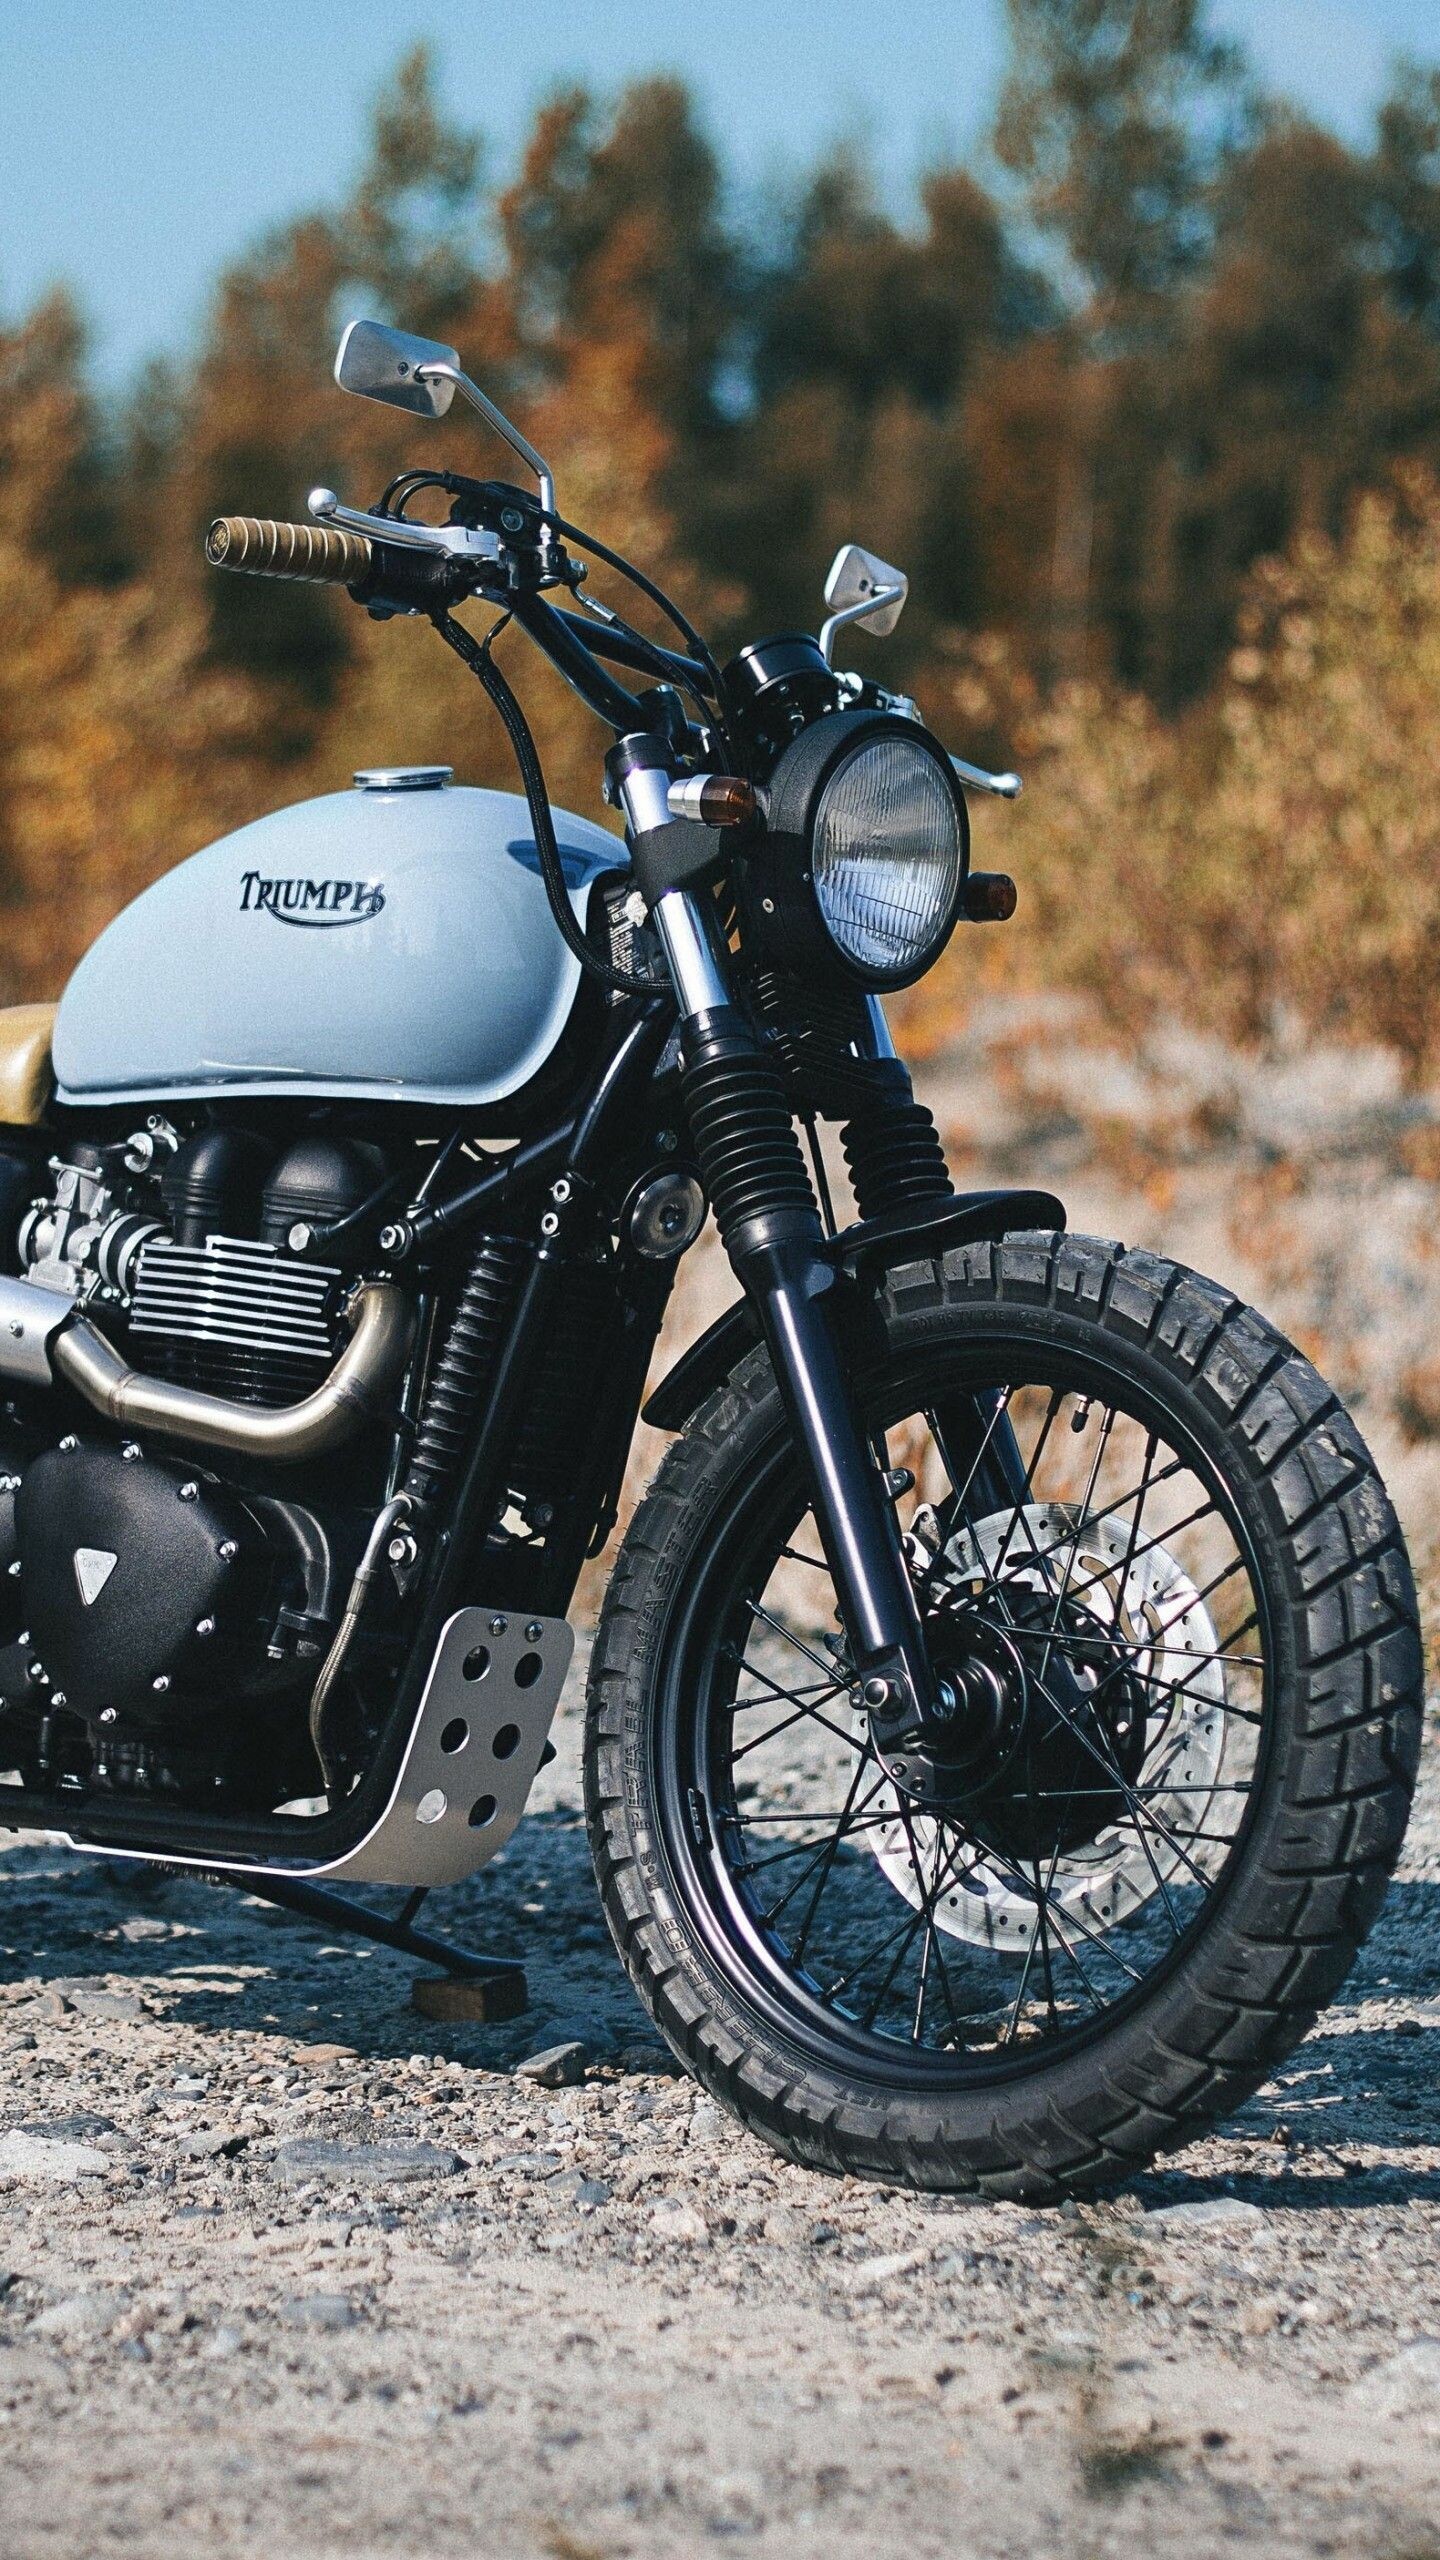 Triumph Motorcycles: Scrambler, A British motorcycle made by a British manufacturer, Launched in 2006. 1440x2560 HD Background.